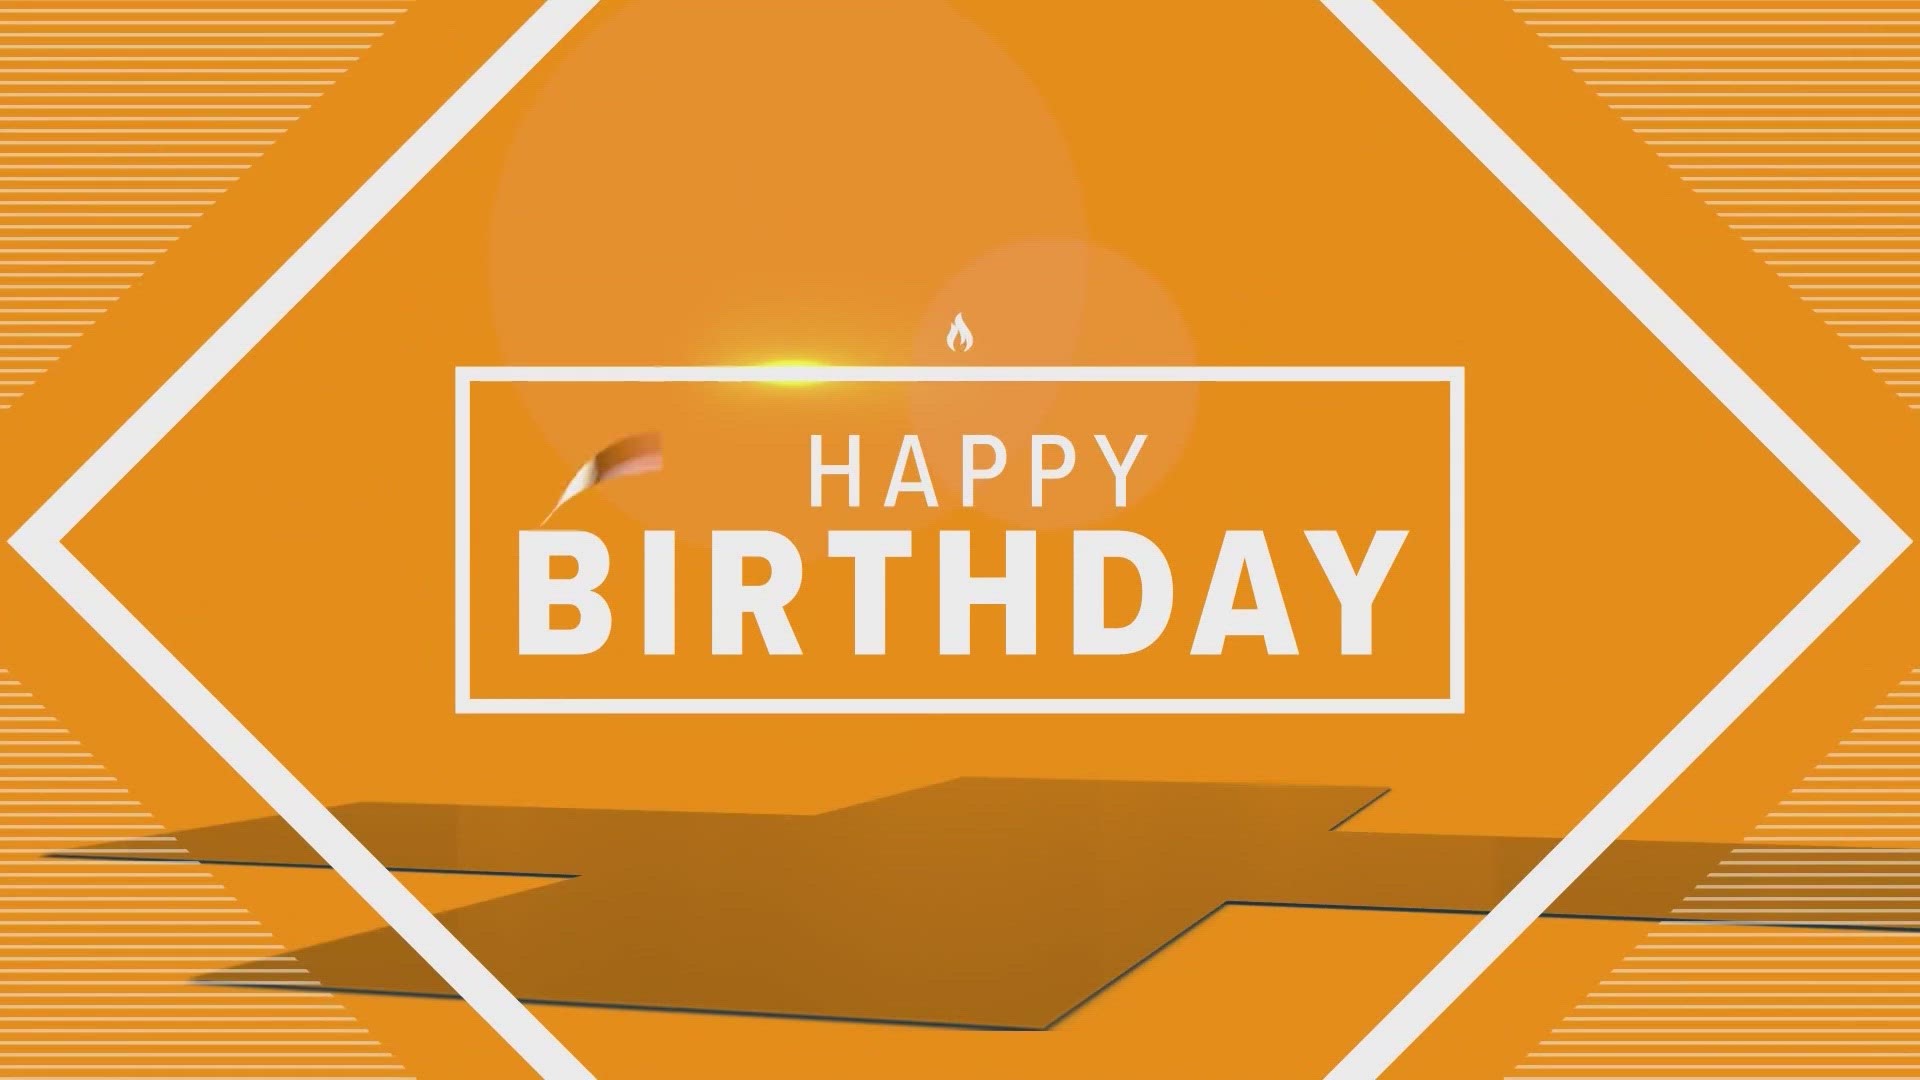 Texas Today wishes everyone born on October 25, a very happy birthday!